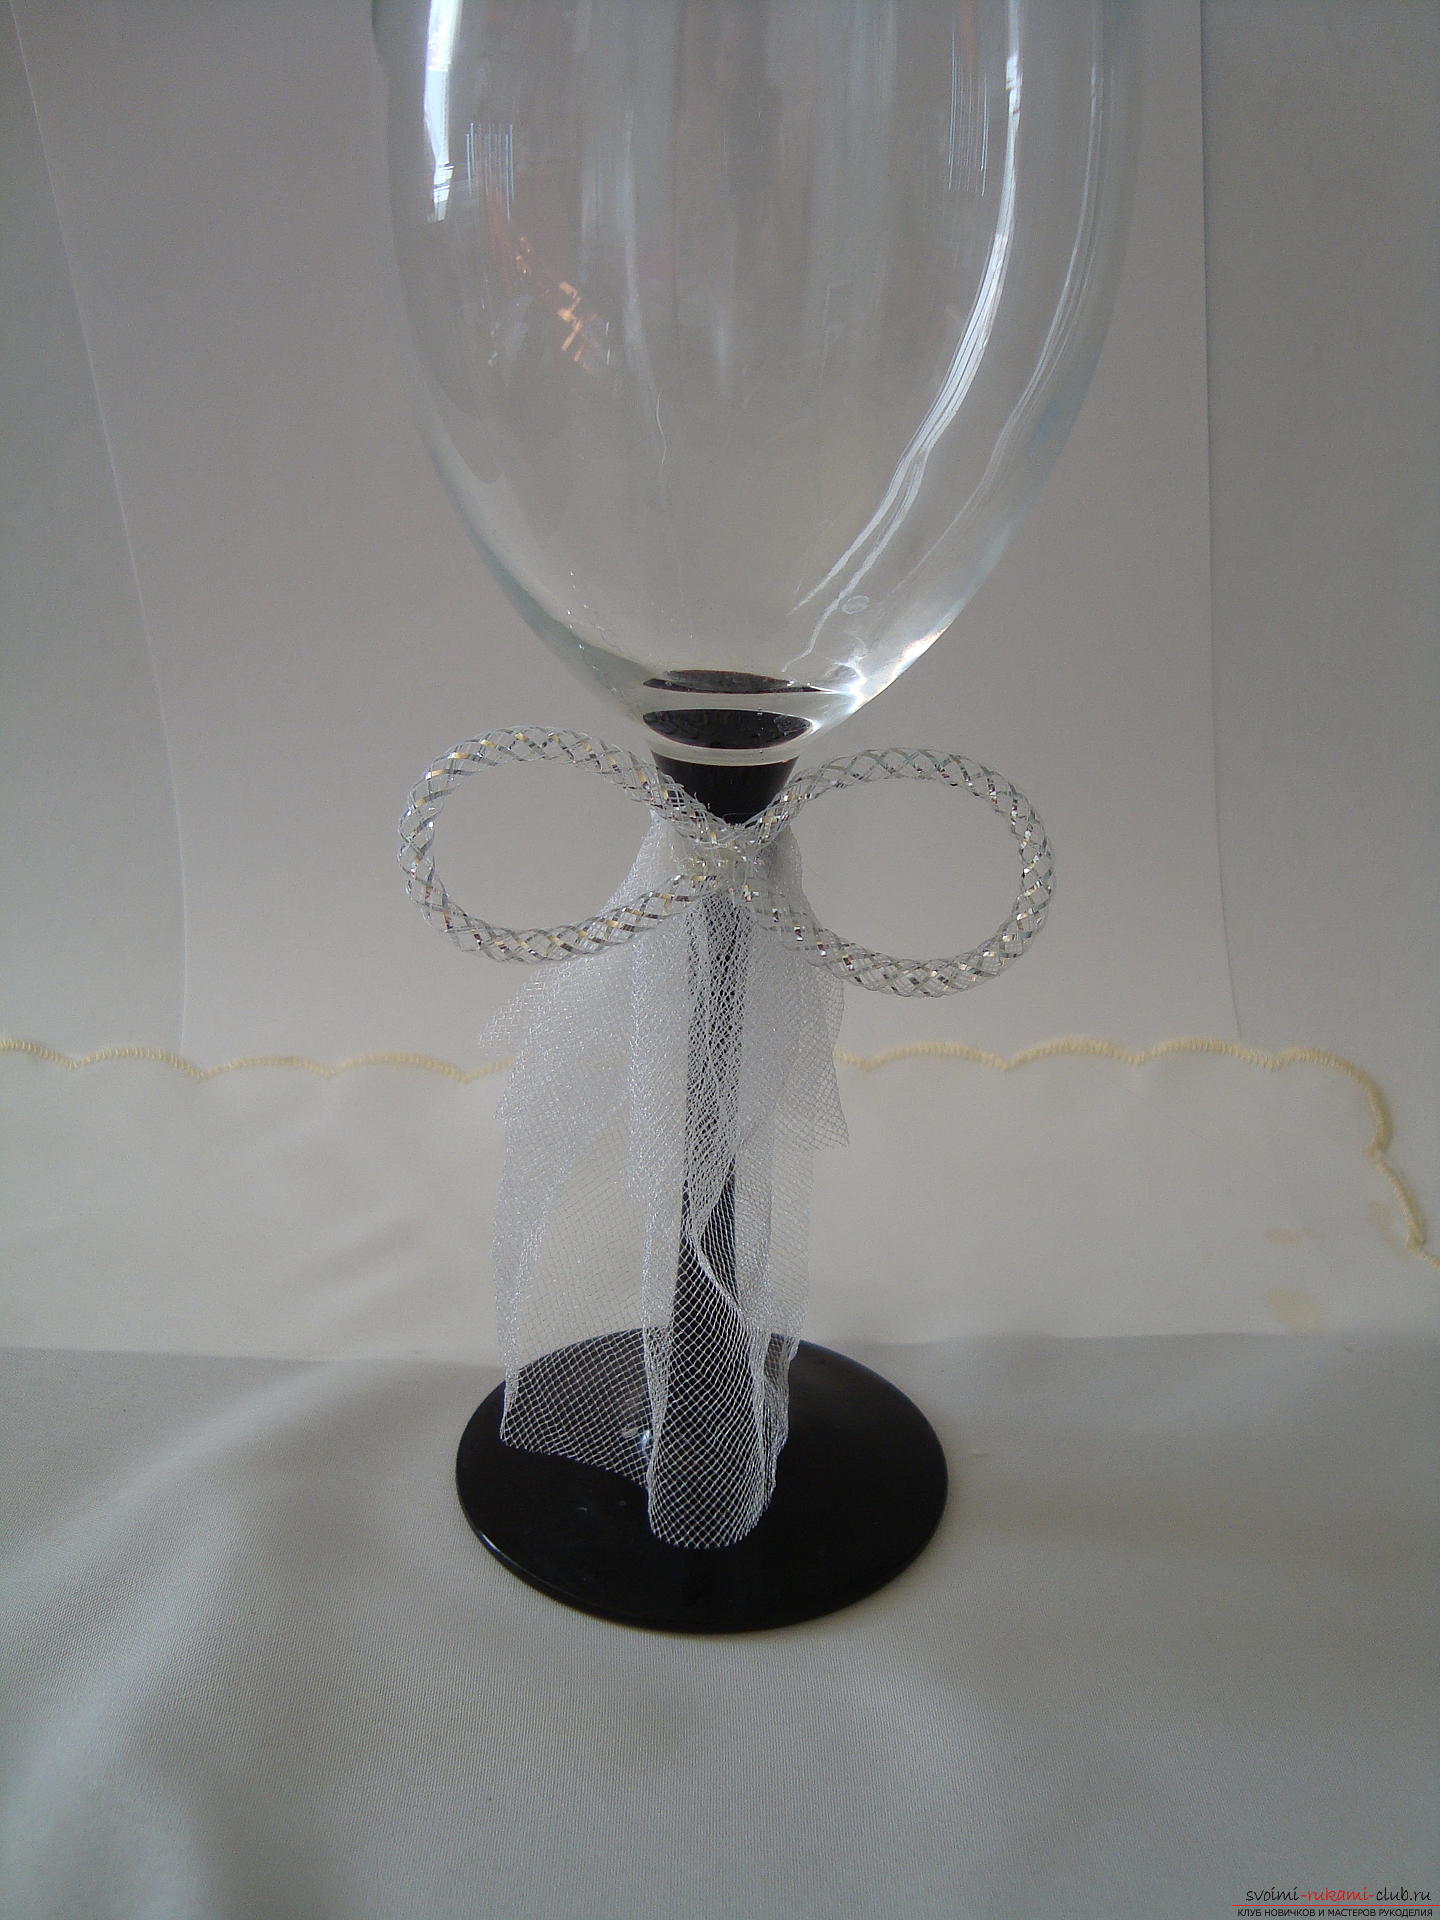 Step-by-step instruction on decorating a wedding glass with a description and a photo. Photo Number 11